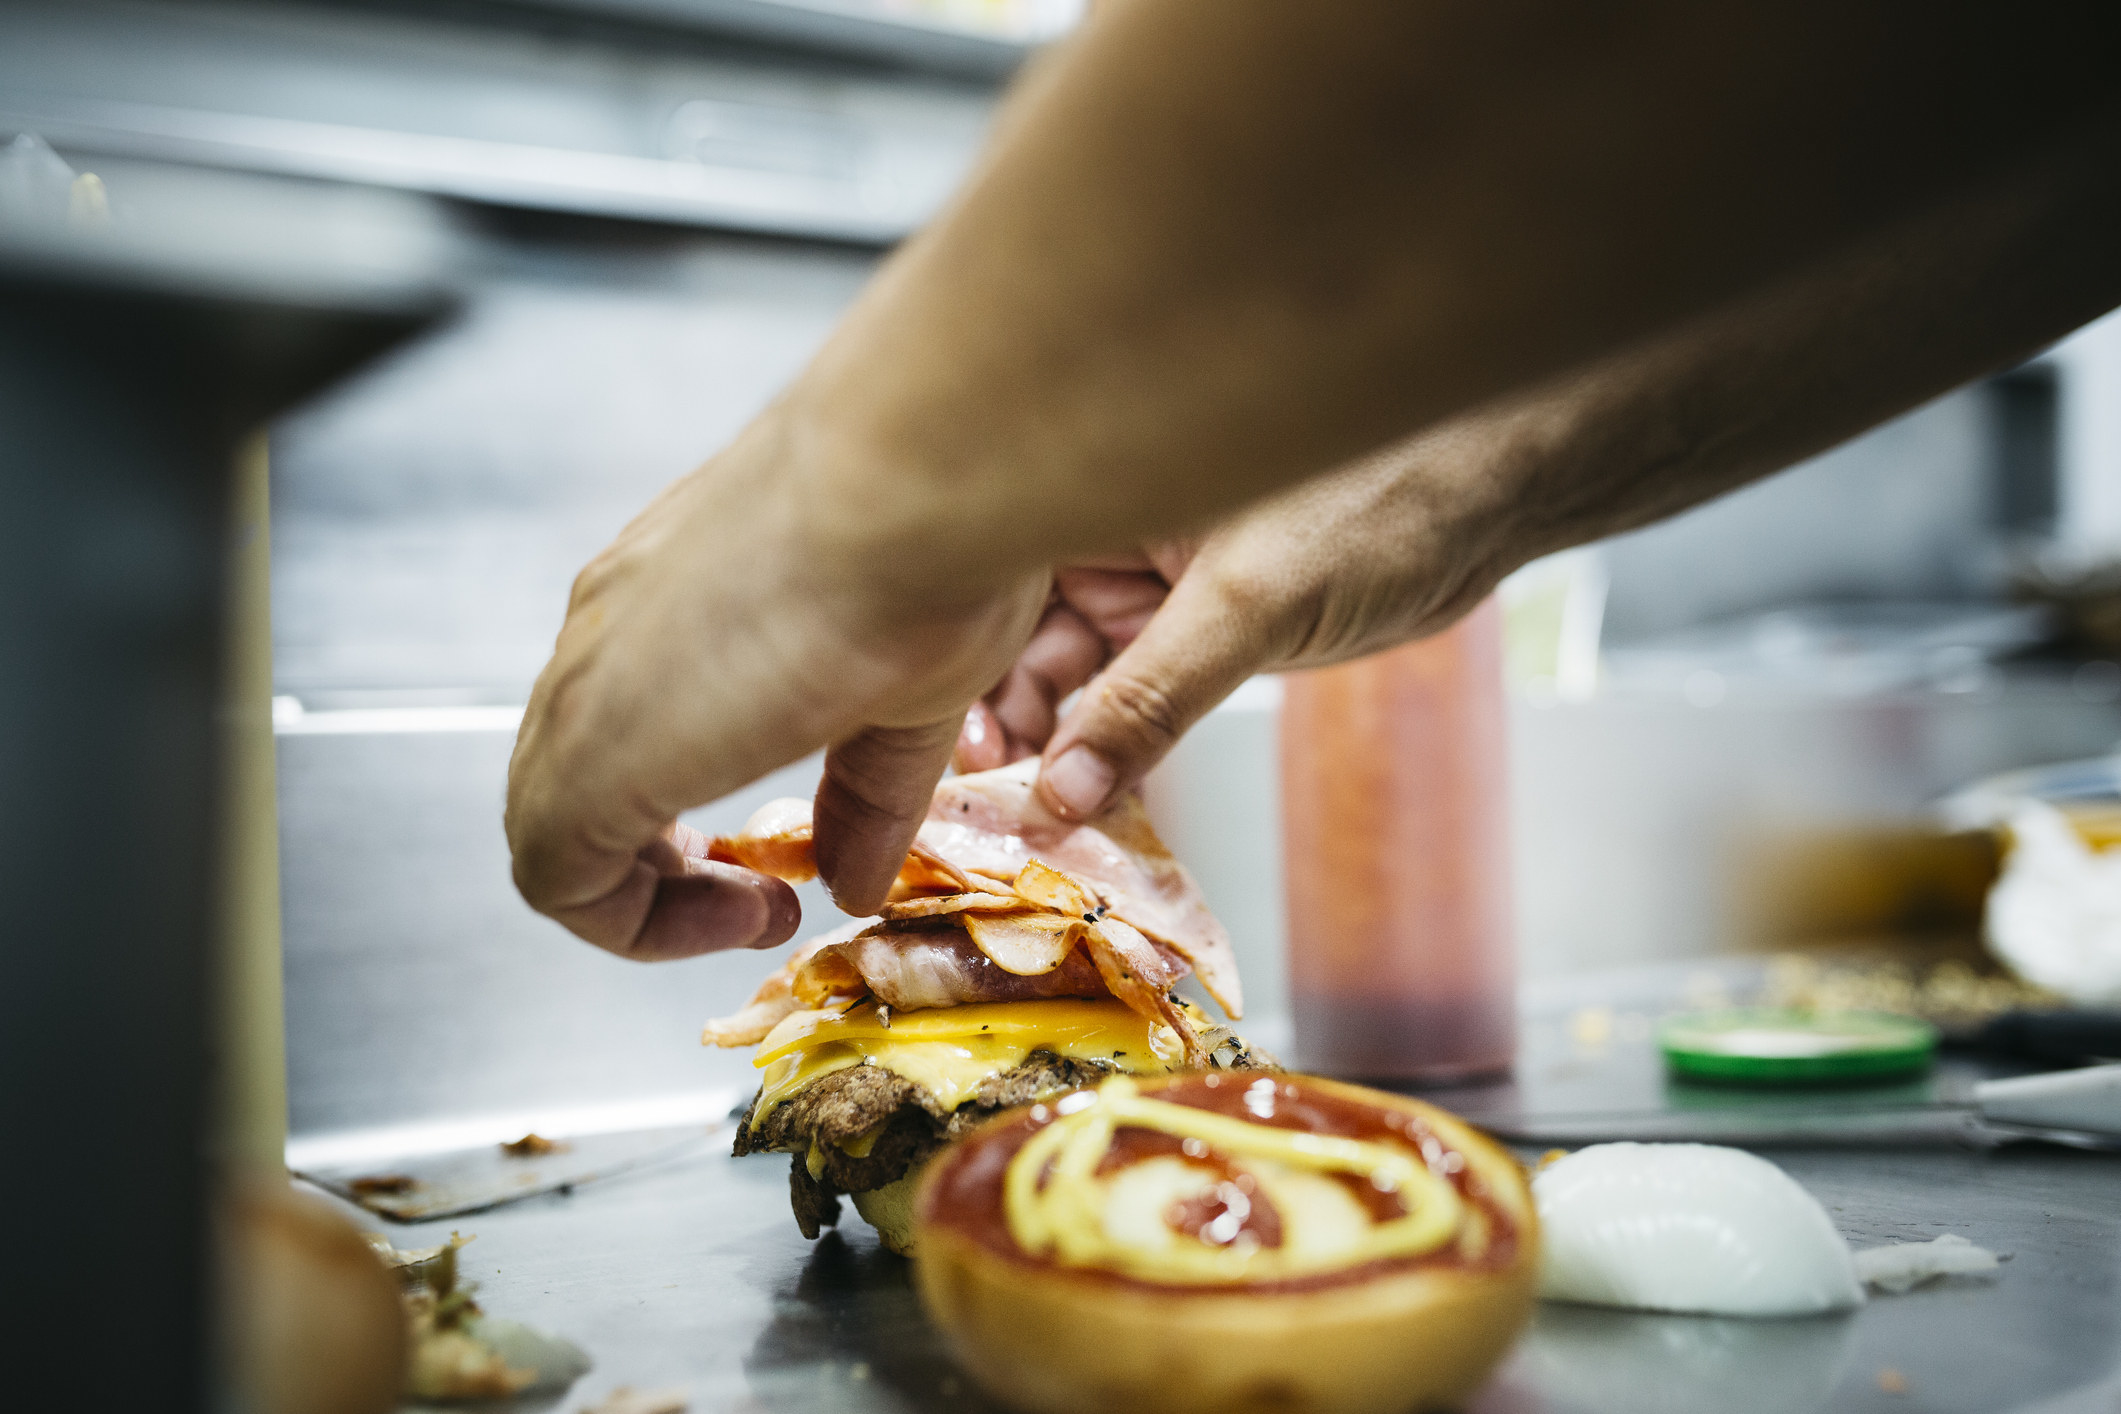 Chef preparing a cheeseburger with his hands.